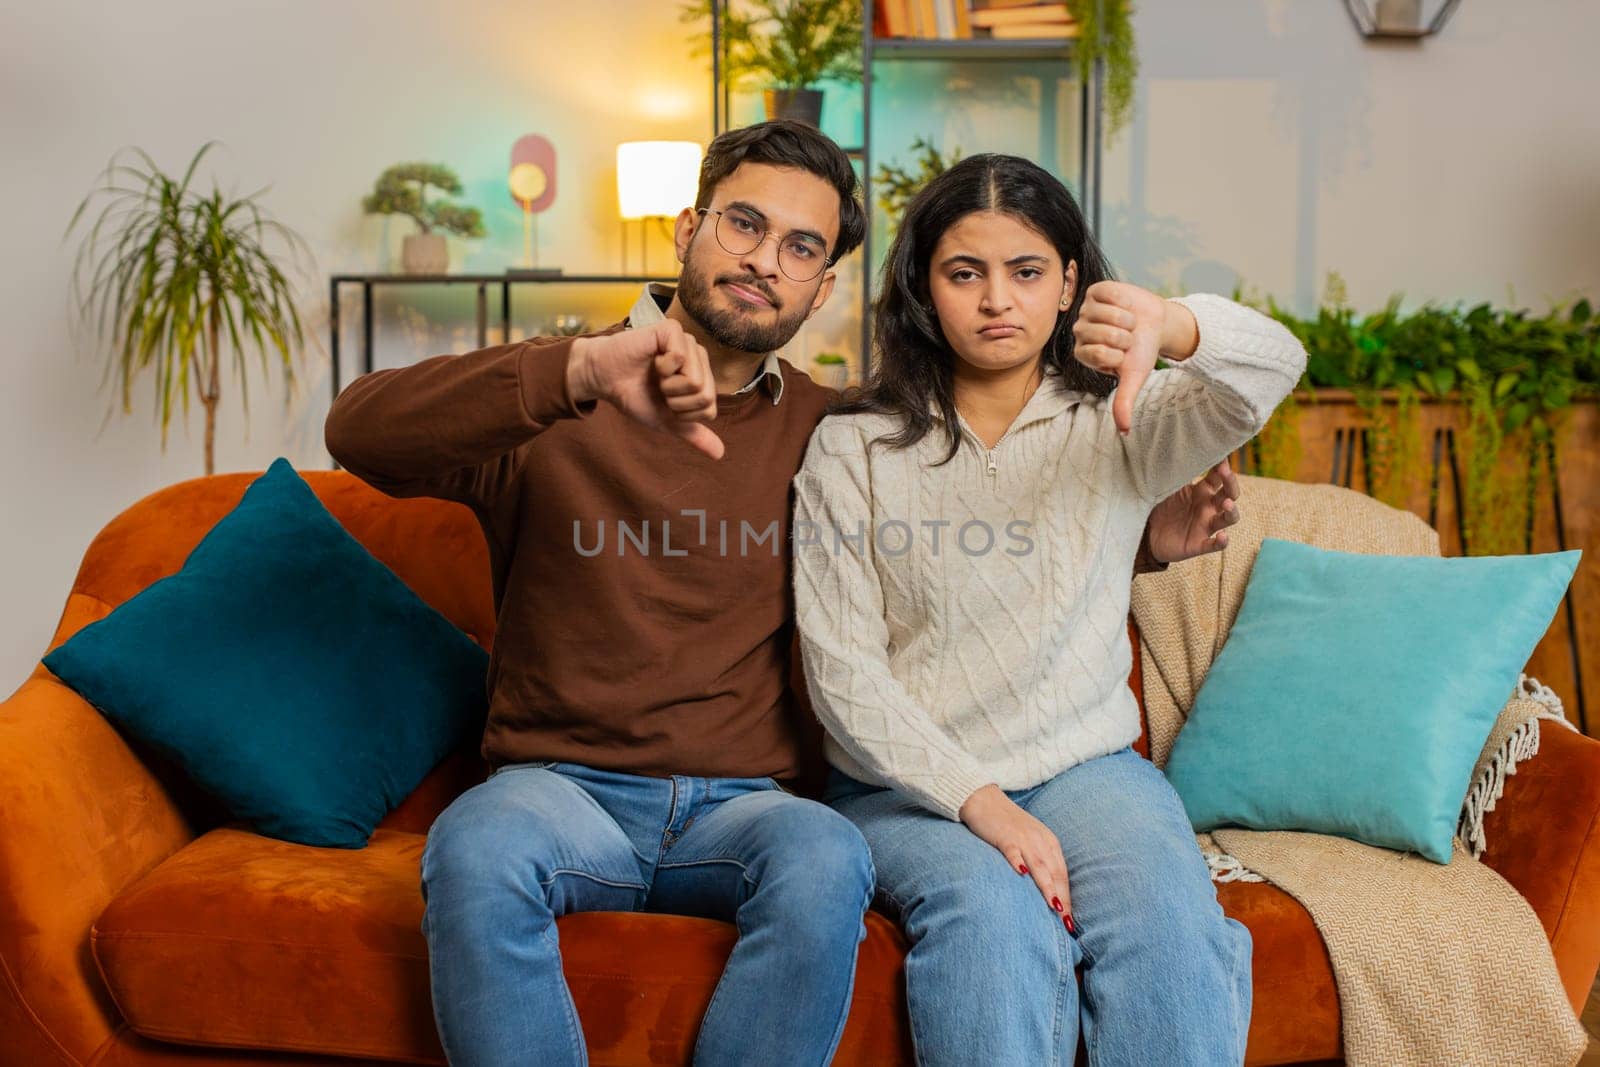 Upset Indian couple showing thumbs down gesture, expressing discontent, disapproval, dissatisfied by efuror